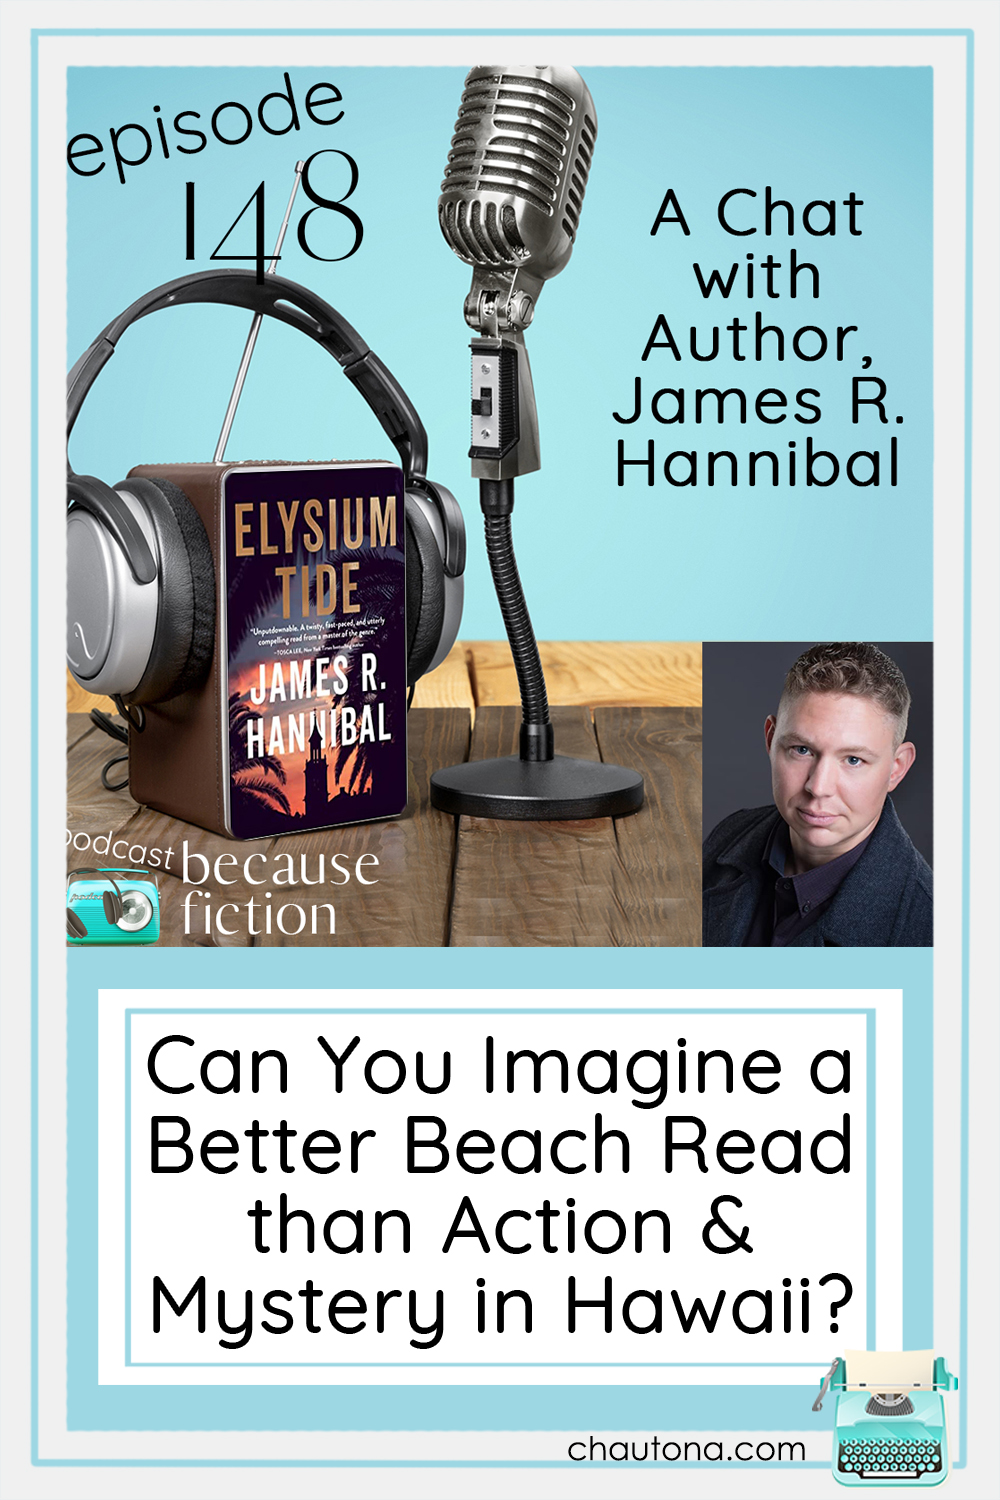 James R. Hannibal joins me to talk about his upcoming novel (can't wait to read this! EEEP!) and then the conversation took a cool turn! via @chautonahavig